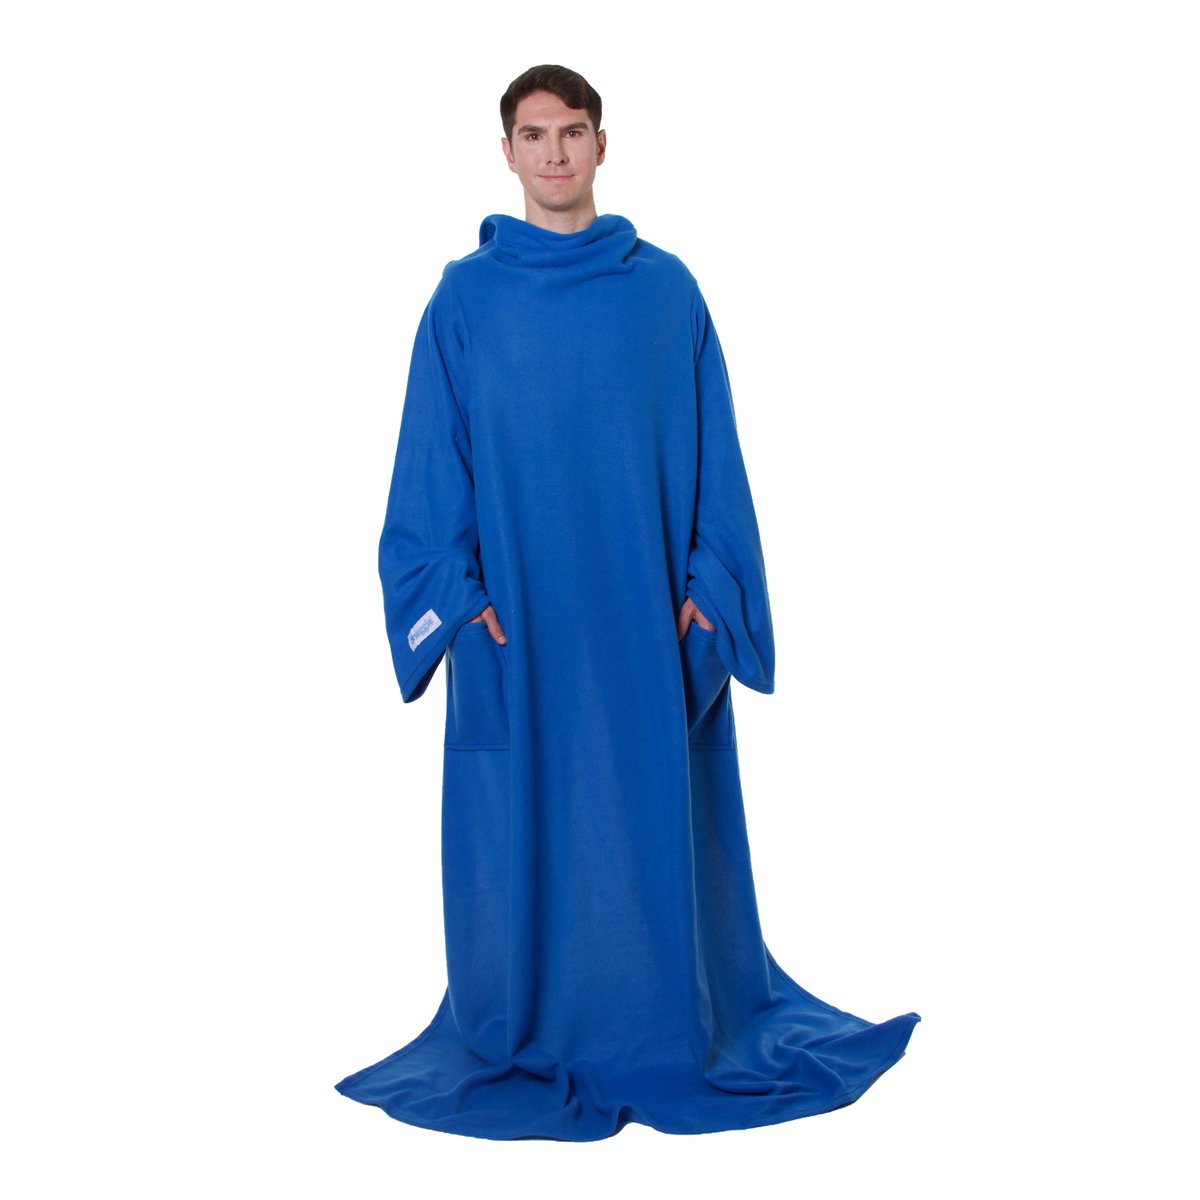 If you don't feel smart enough to build a business, just remember Snuggie, a wearable blanket with sleeves, made hundreds of millions in revenue.